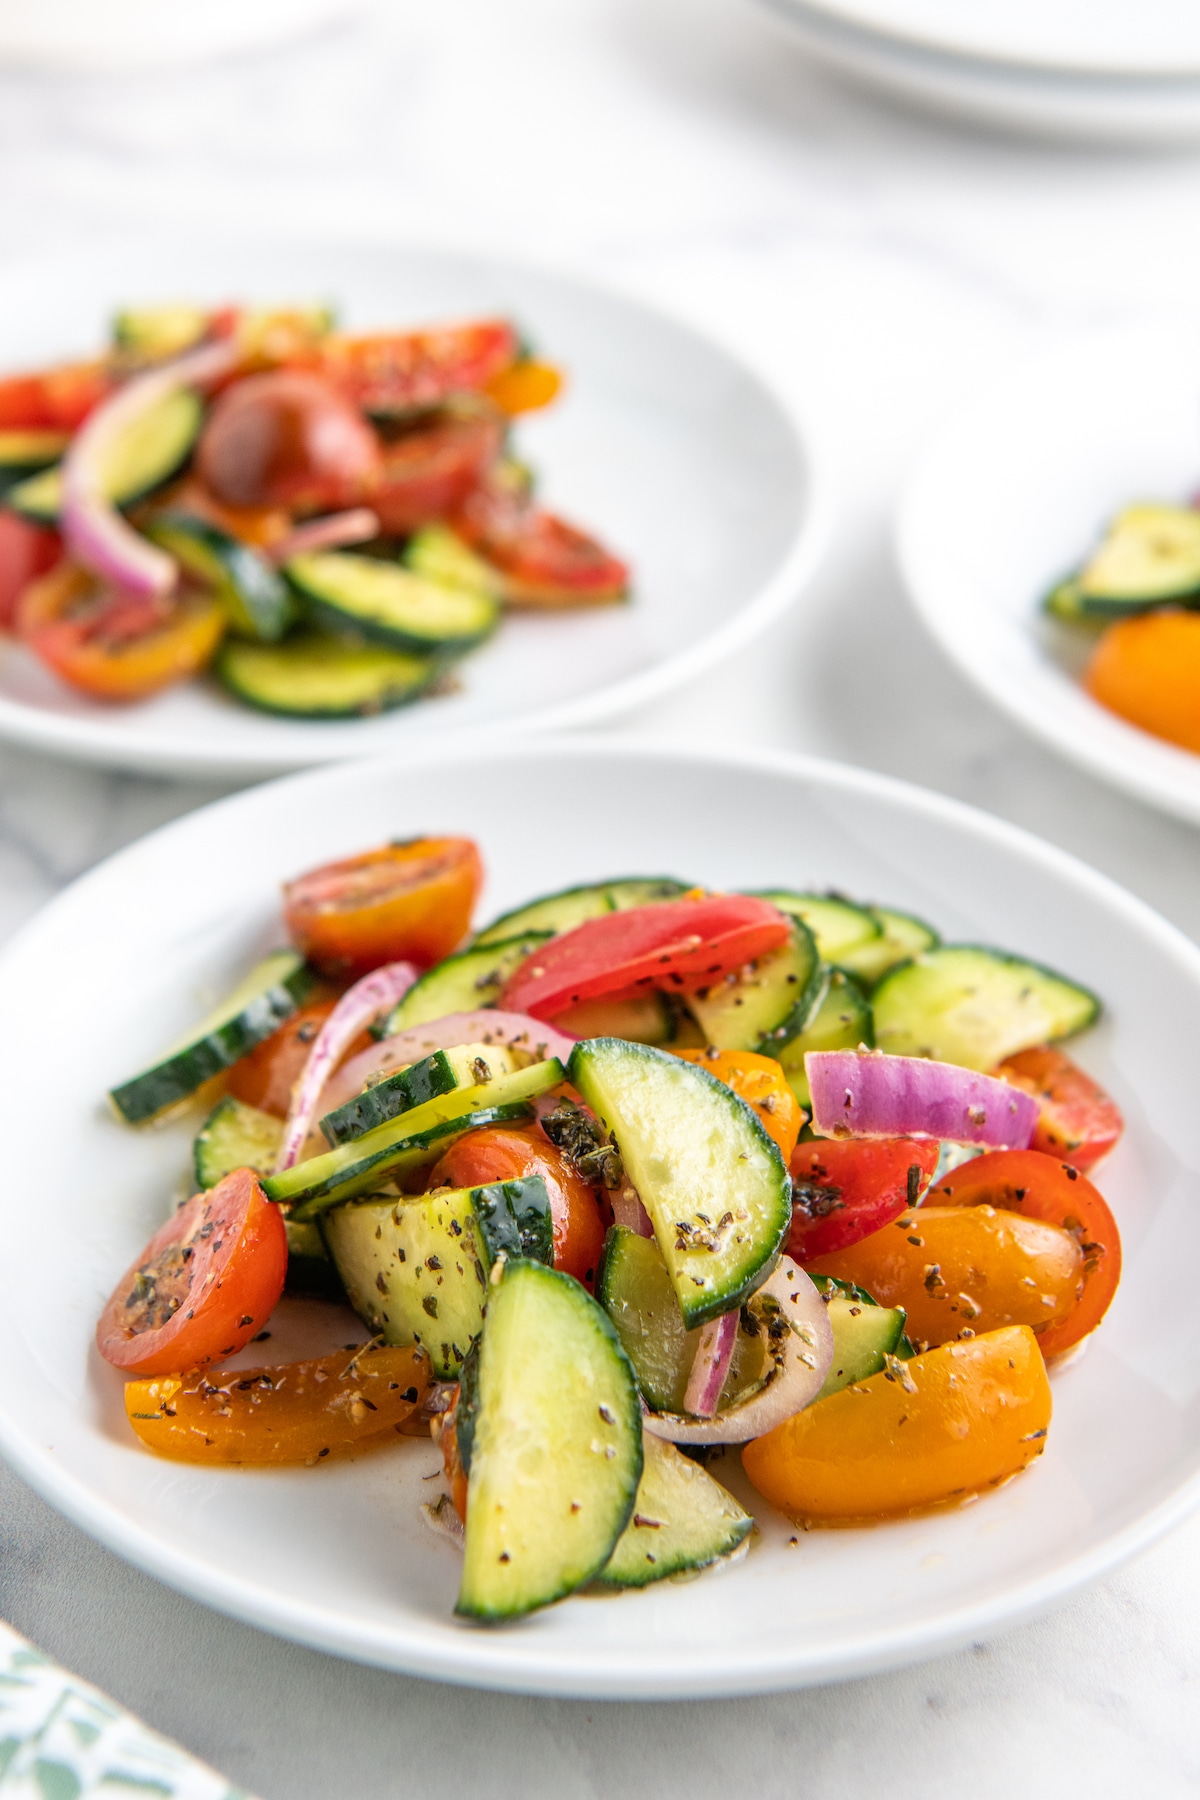 Tomato and cucumber salad on a white plate.